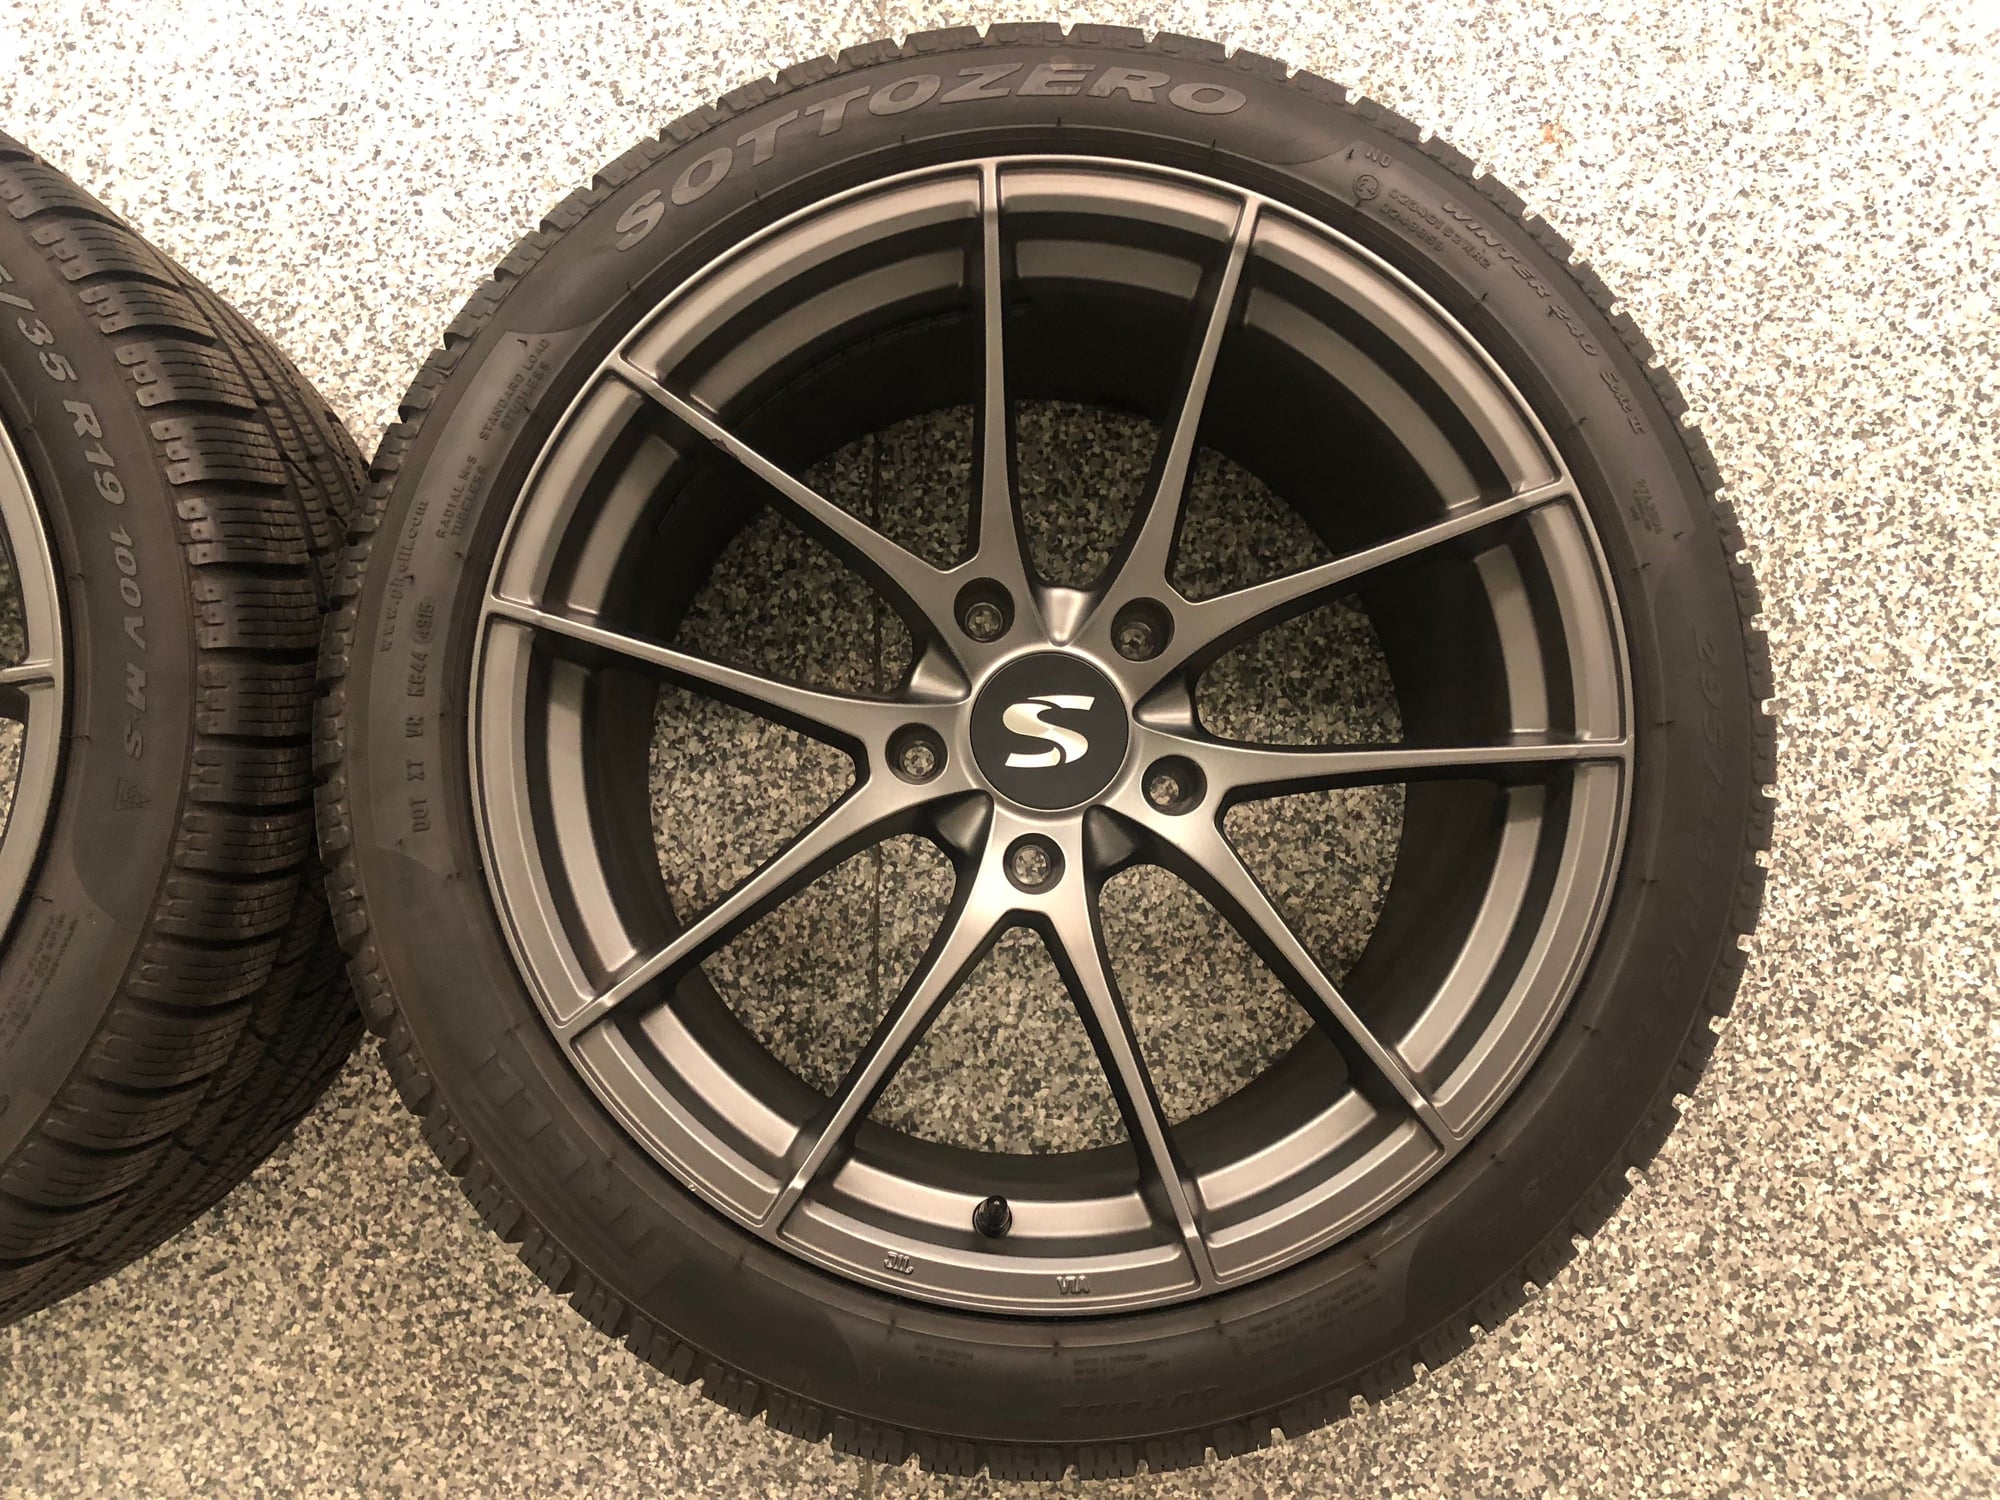 Wheels and Tires/Axles - 991.2 19" Winter Wheel/Tire Set for NB Cars - Used - 2017 to 2019 Porsche 911 - Oklahoma City, OK 73102, United States